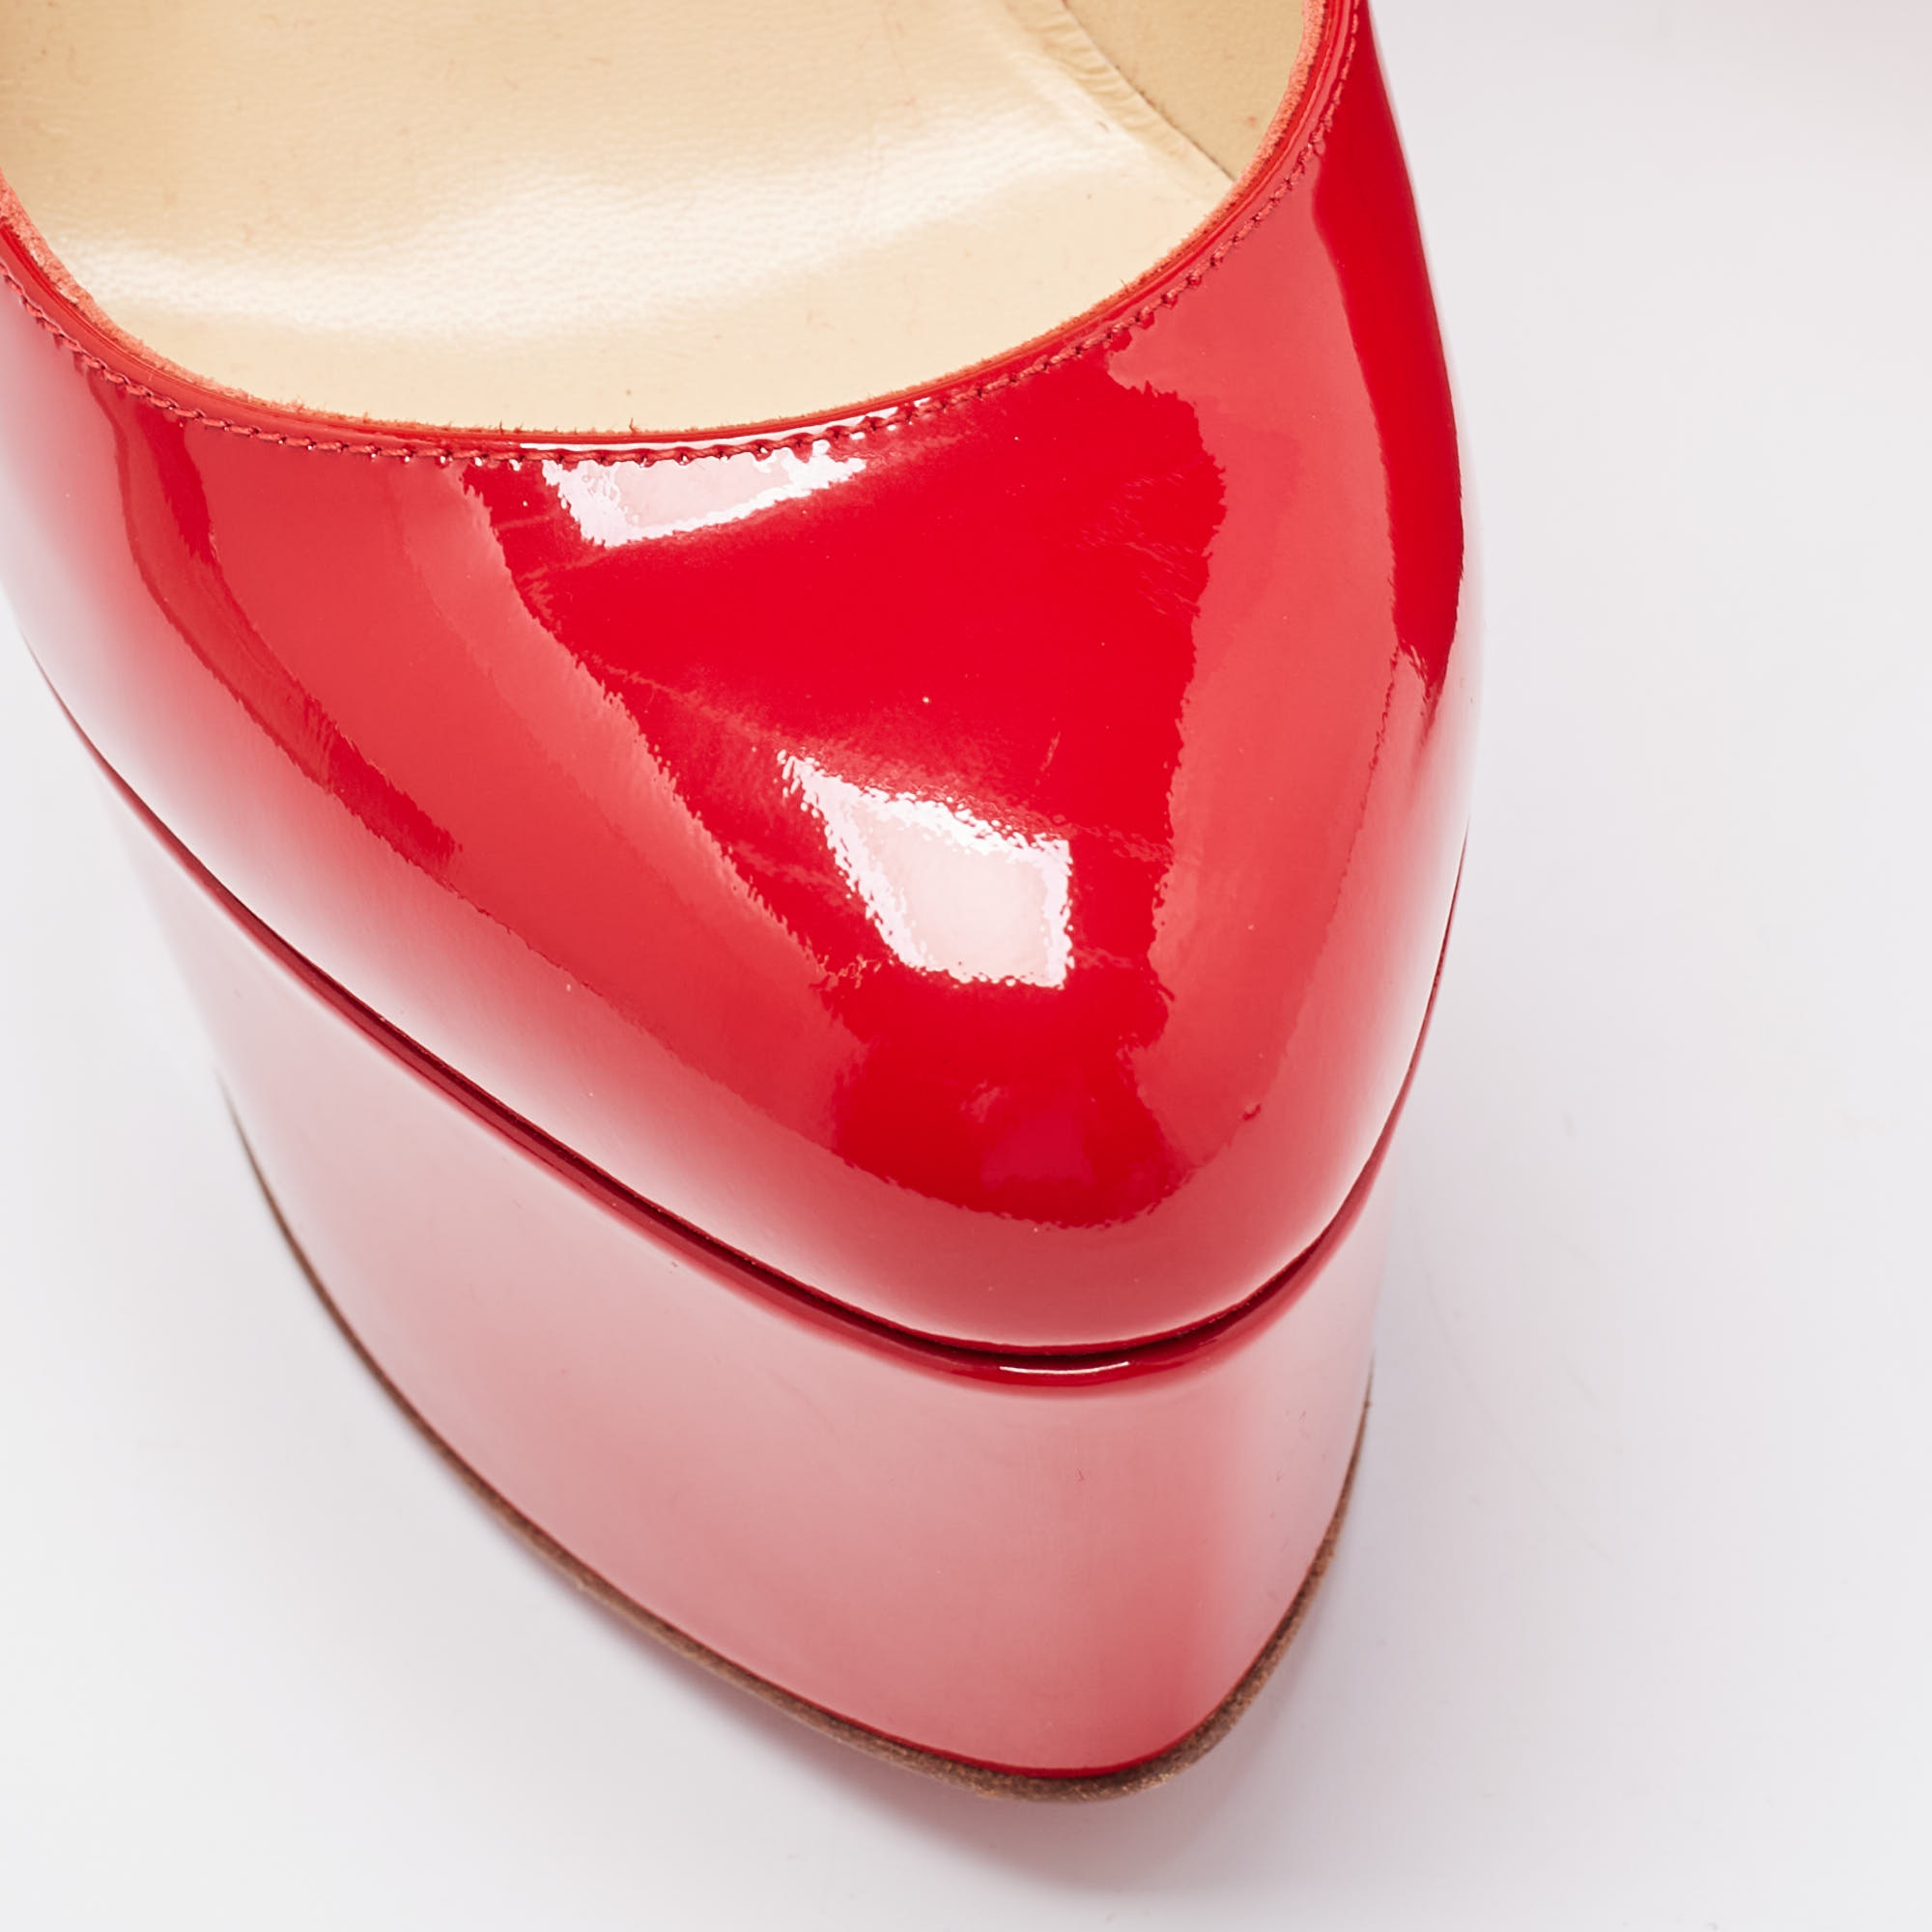 Christian Louboutin Red Patent Leather Victoria Platform Pumps Size 36